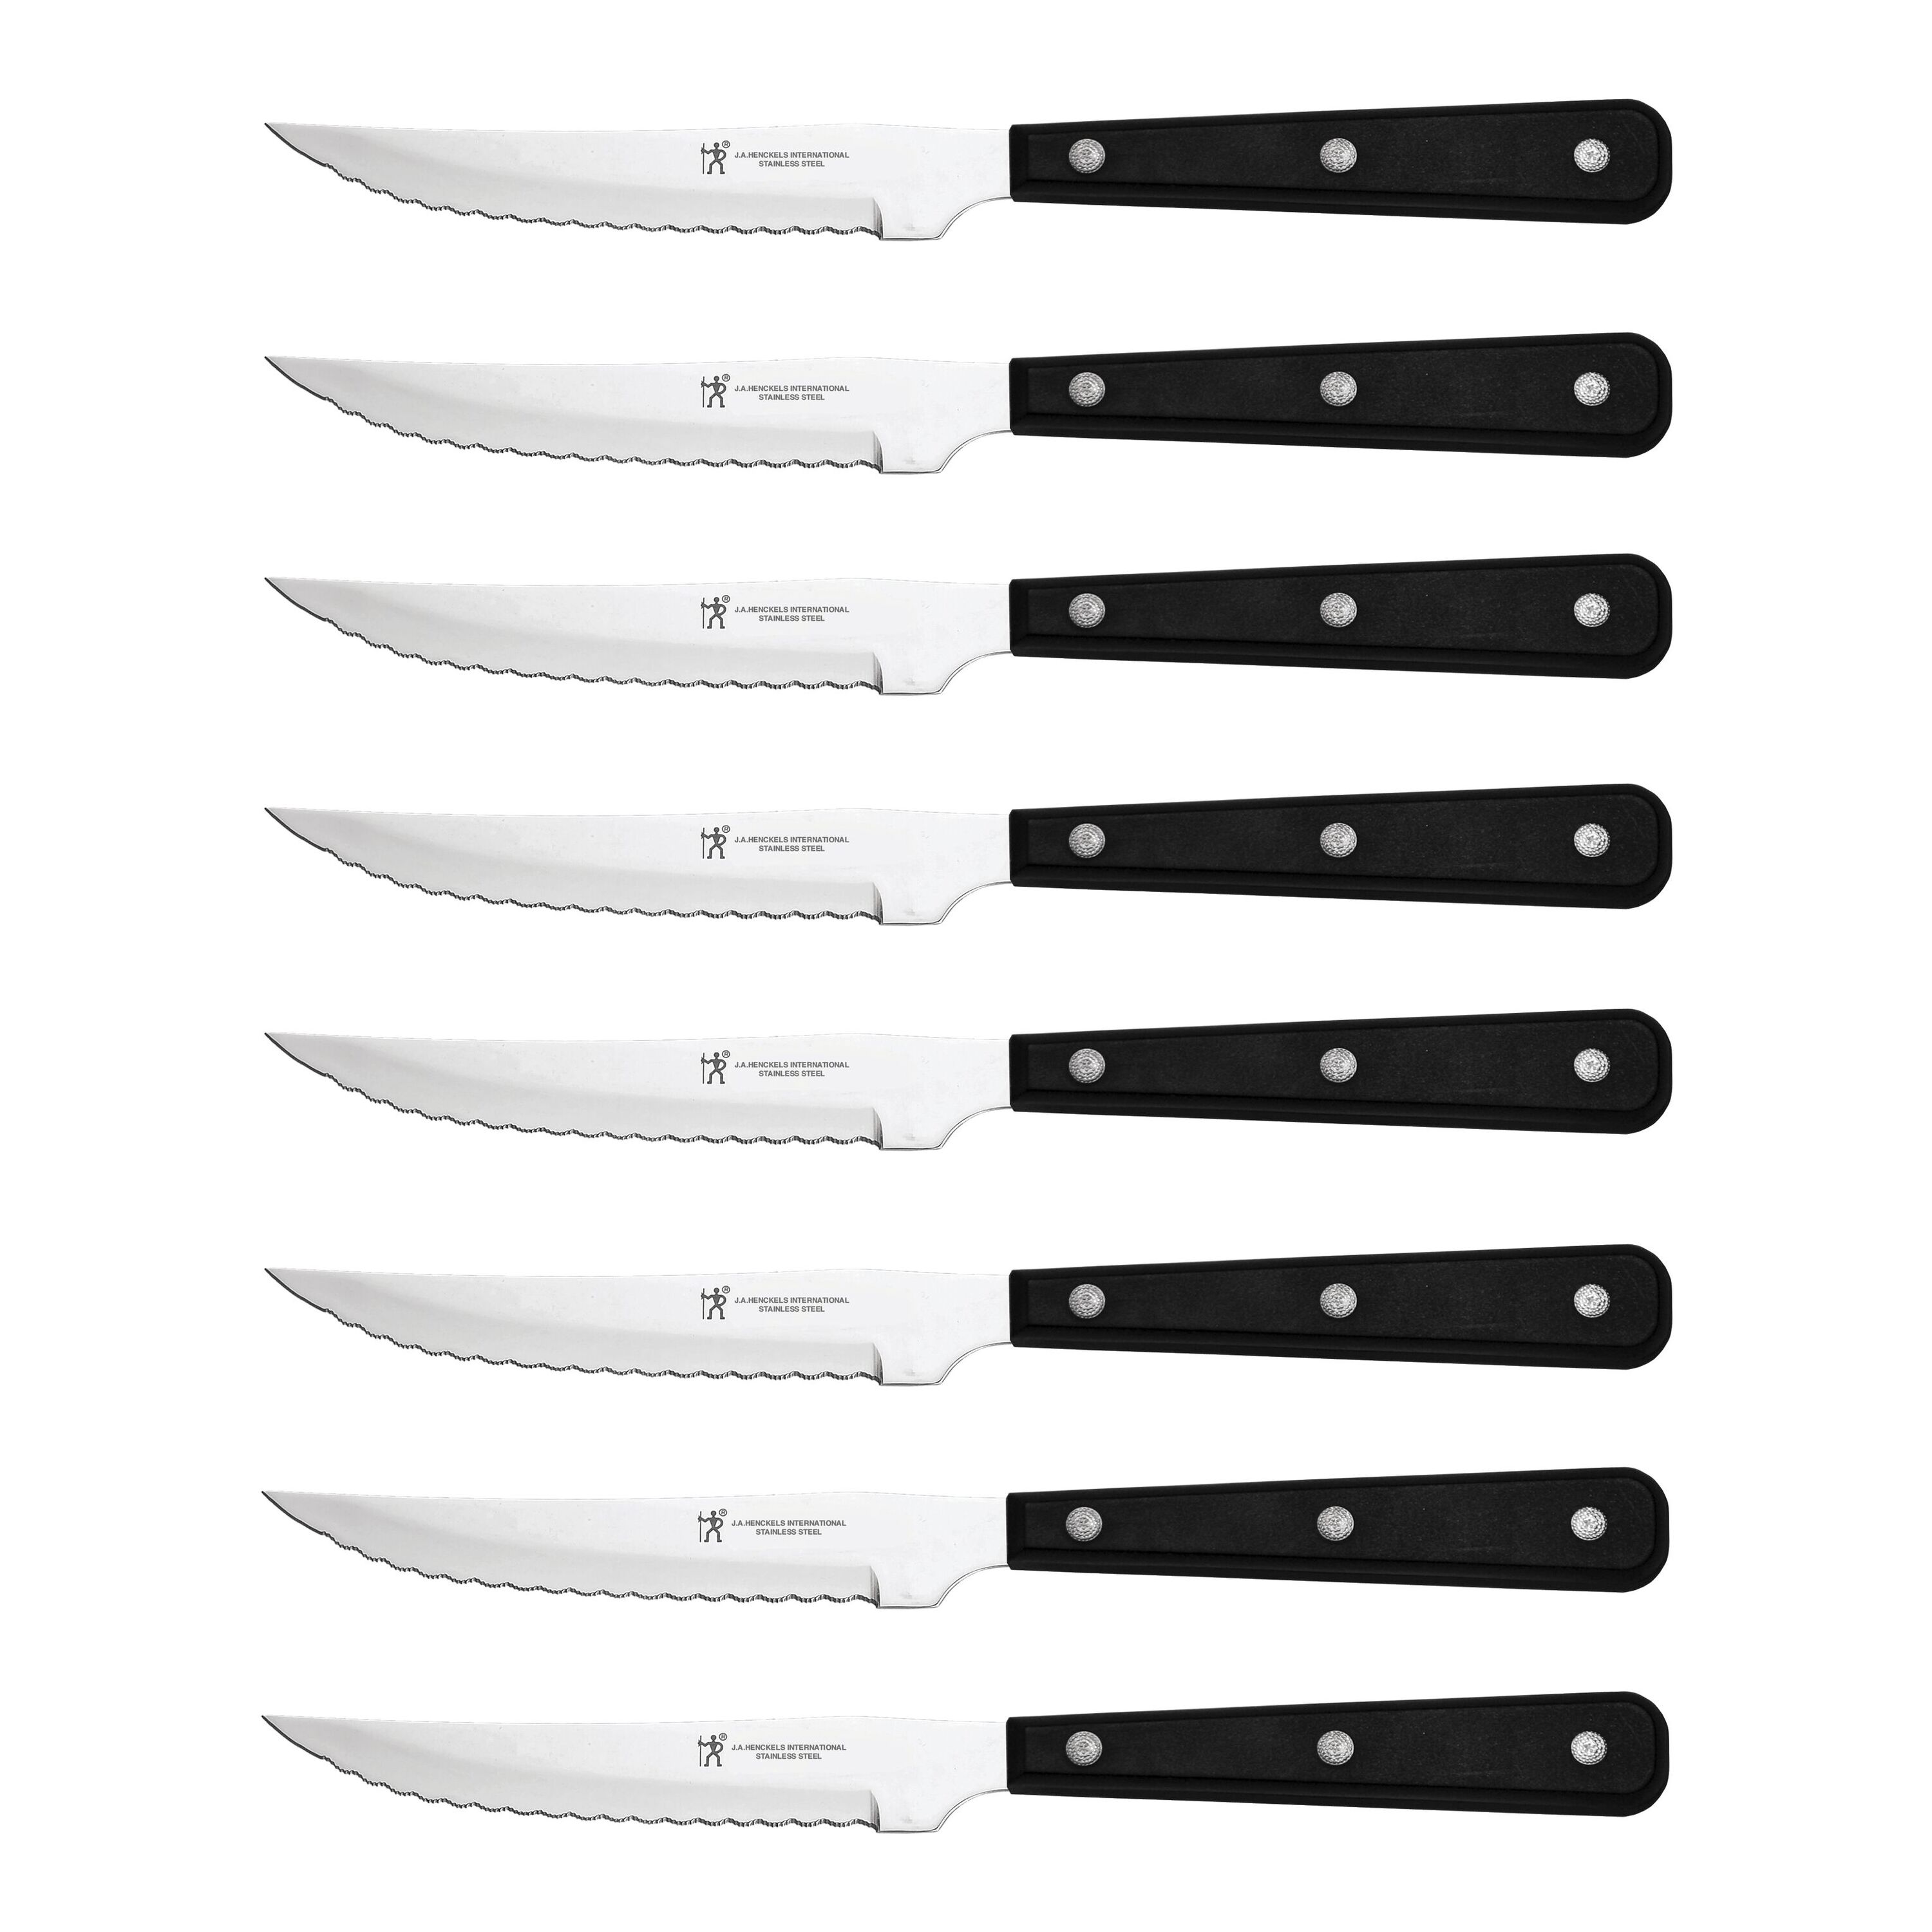 NEW* Zwilling Steak Sets 8pc Stainless Serrated Steak Knife